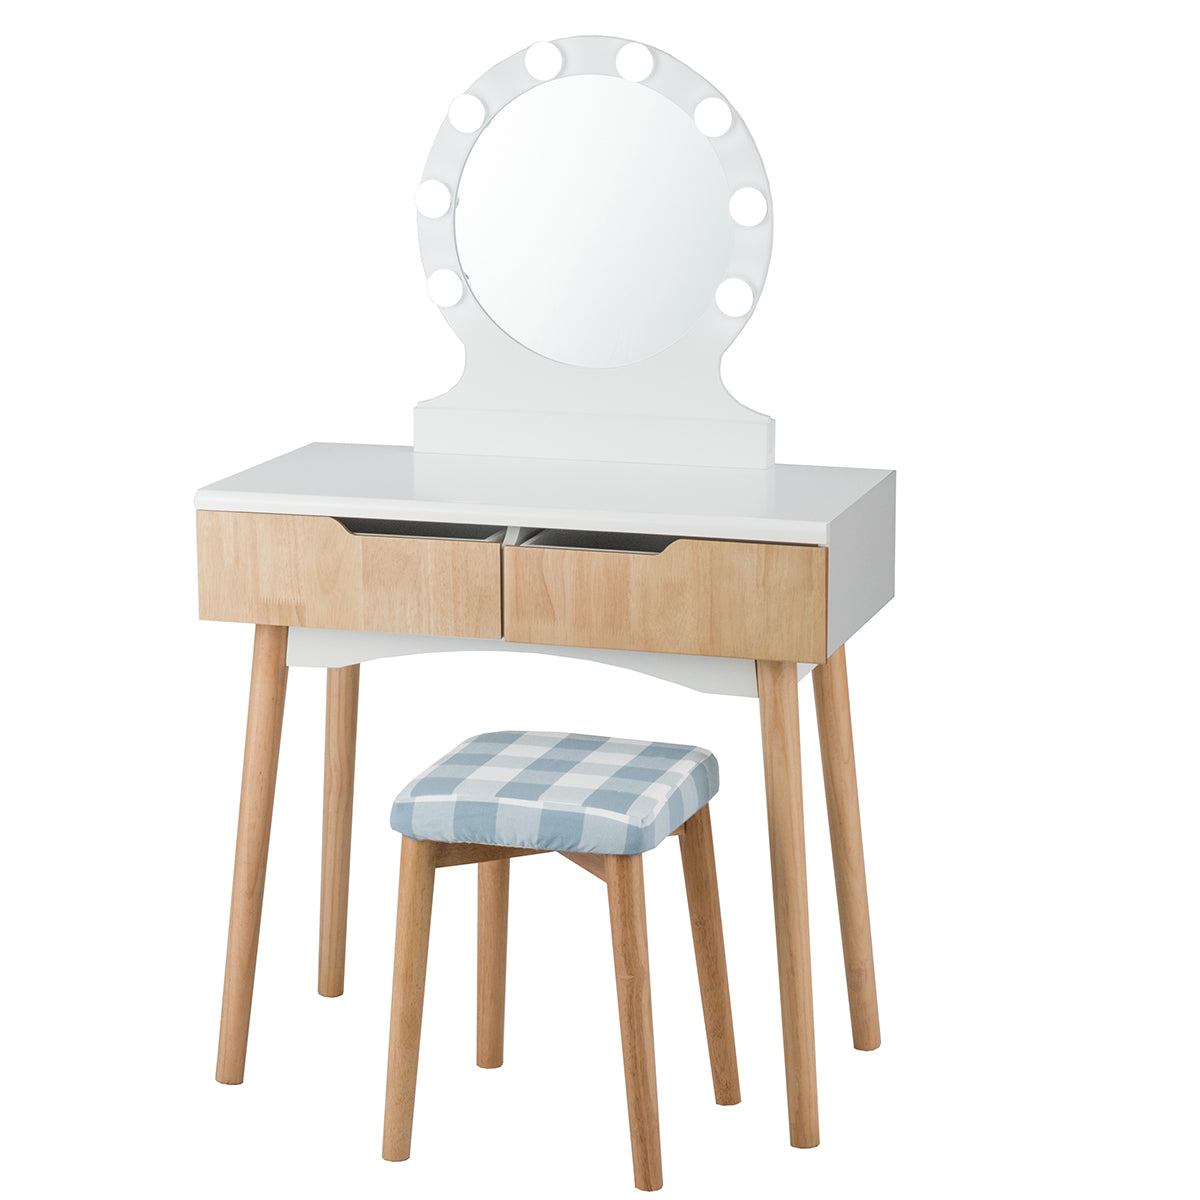 Vanity Table Set with 8 Light Bulbs and Touch Switch